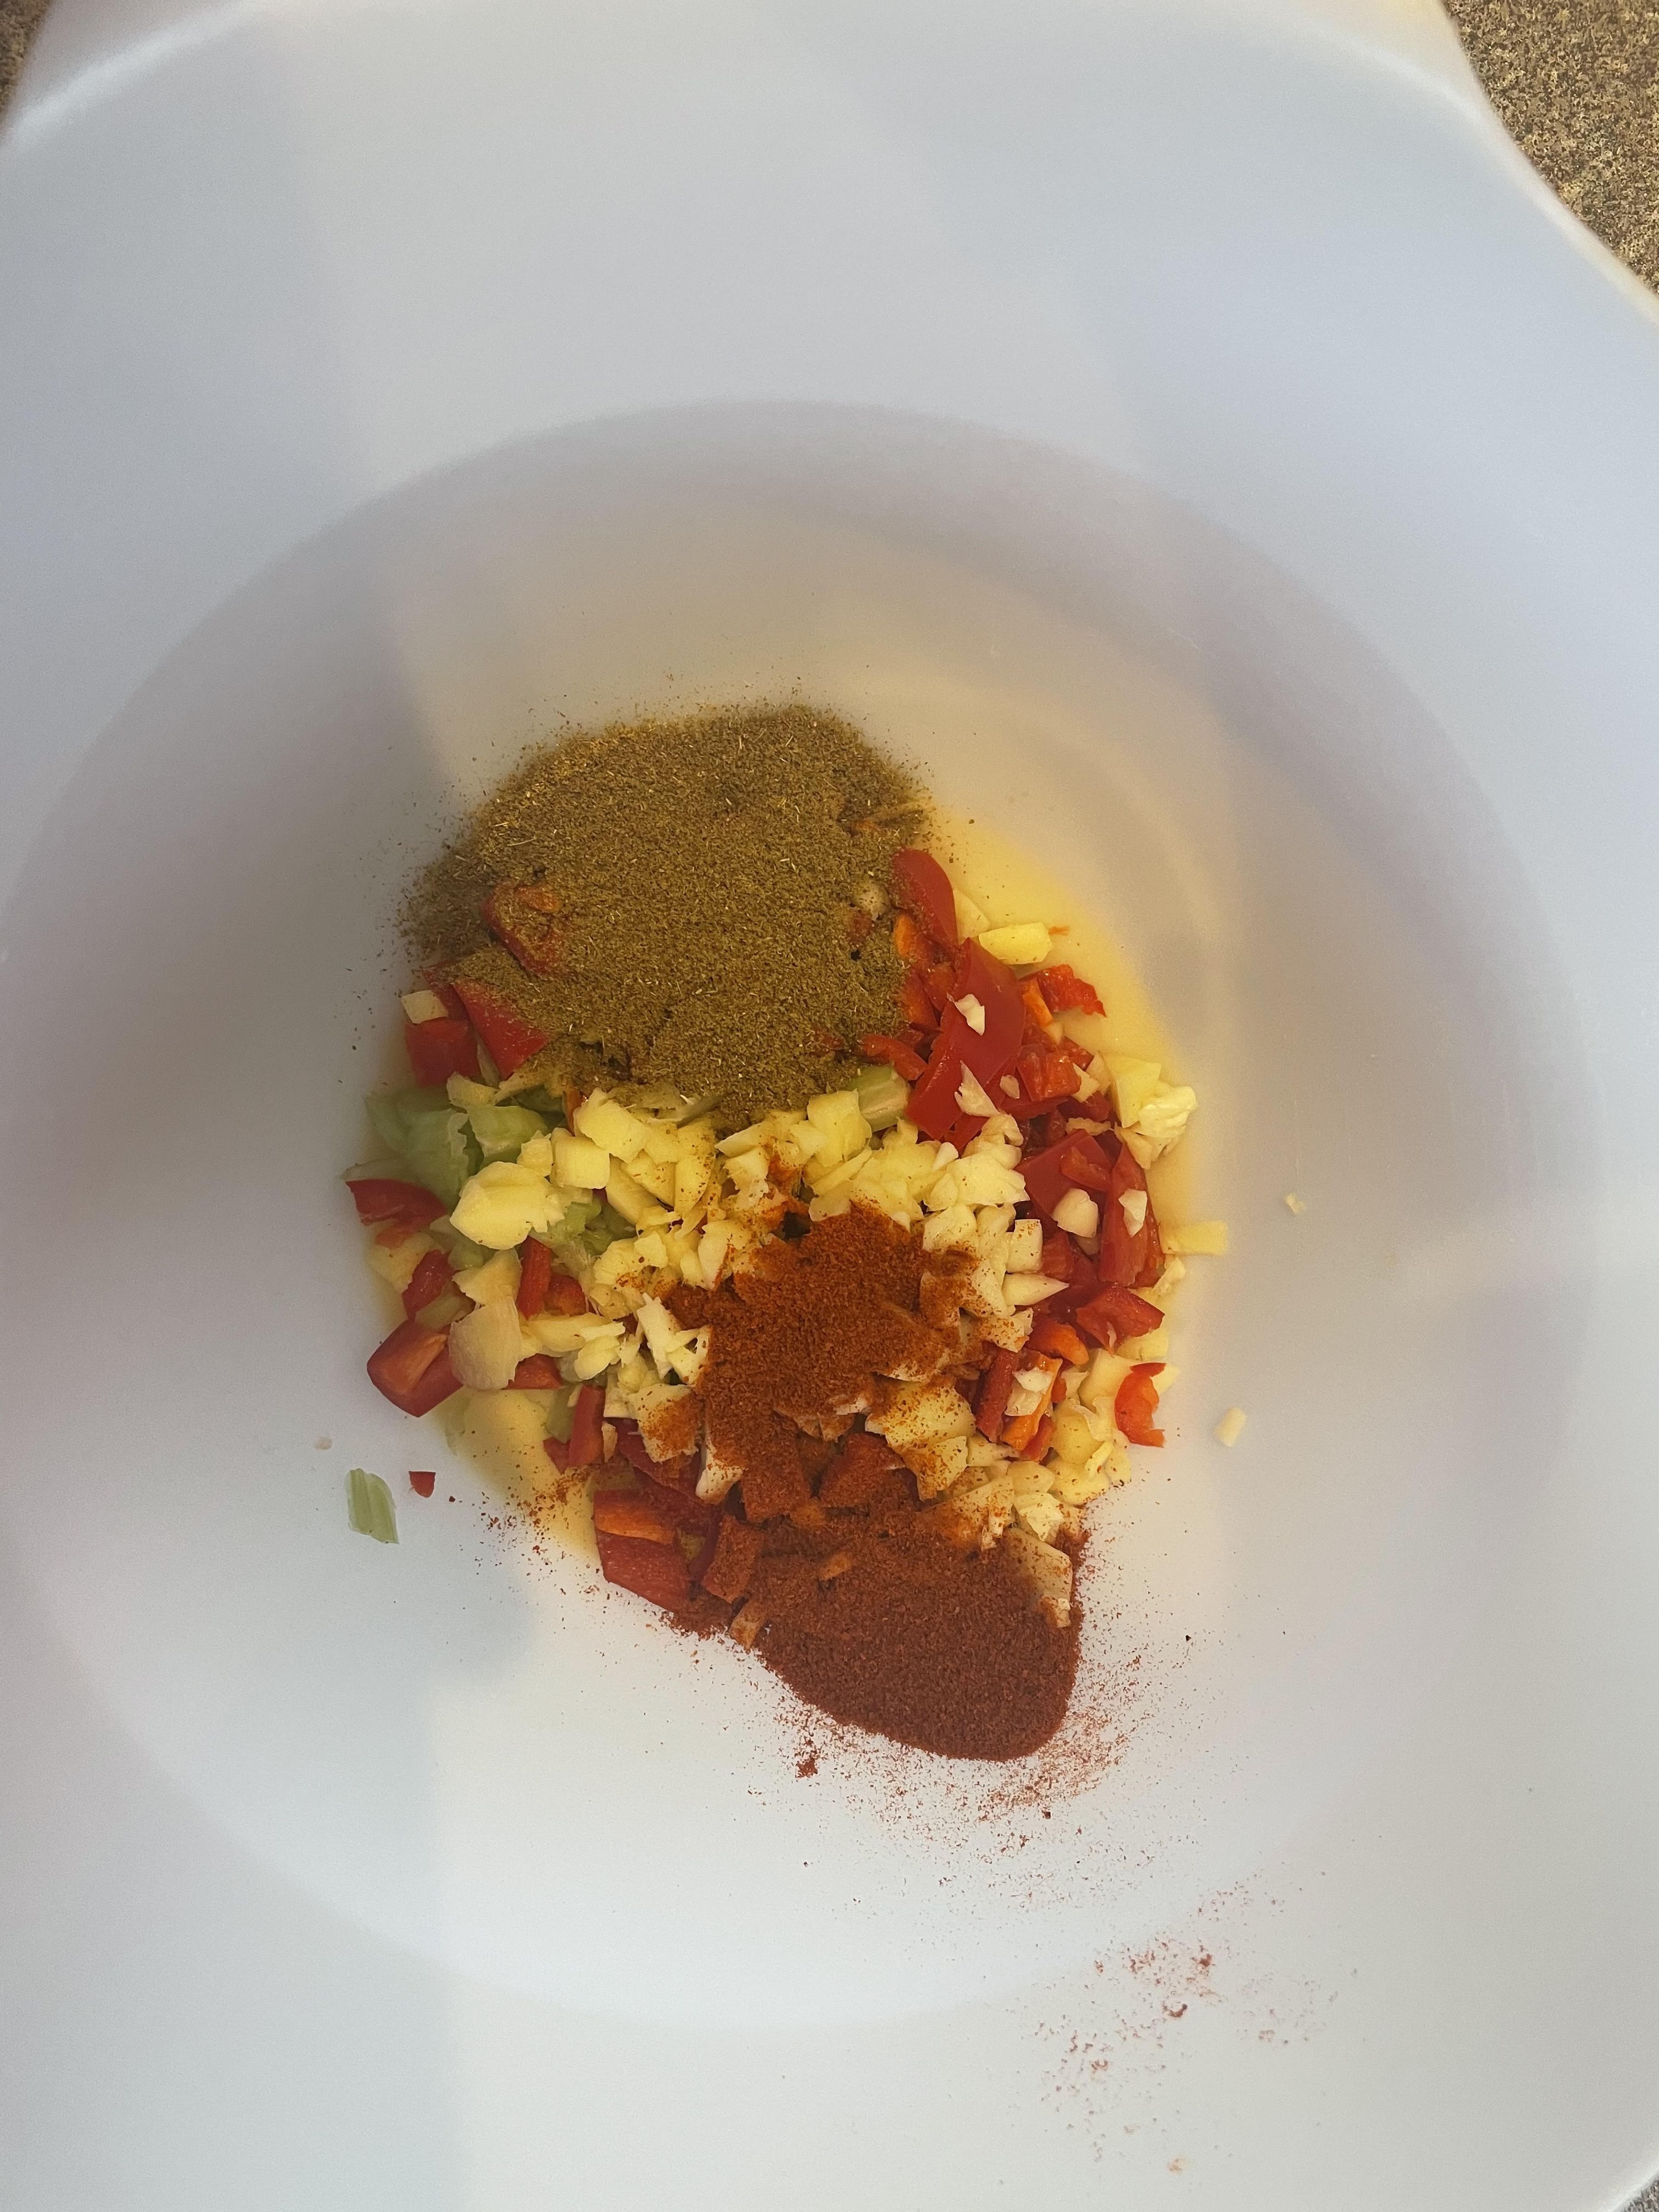 Add the chillies, celery, garlic and ginger into a mixing bowl once in the bowl add your 2tsp of Hot paprika, Cumin Powder and 1 pinch of salt and mix it all together. 